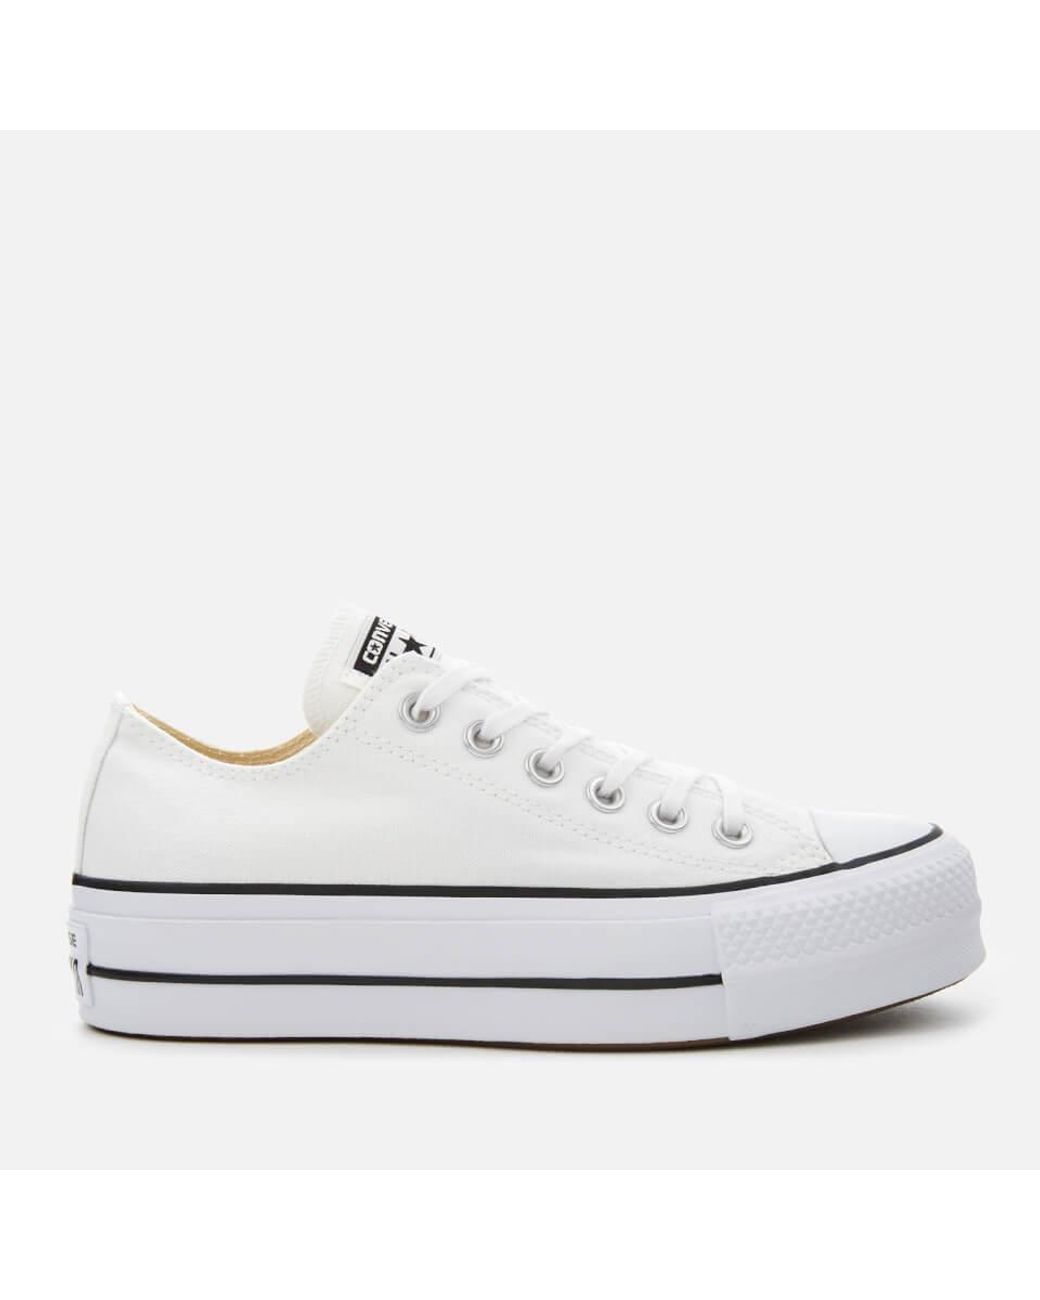 Converse Canvas Chuck Taylor All Star Lift Ox Trainers in White - Save ...